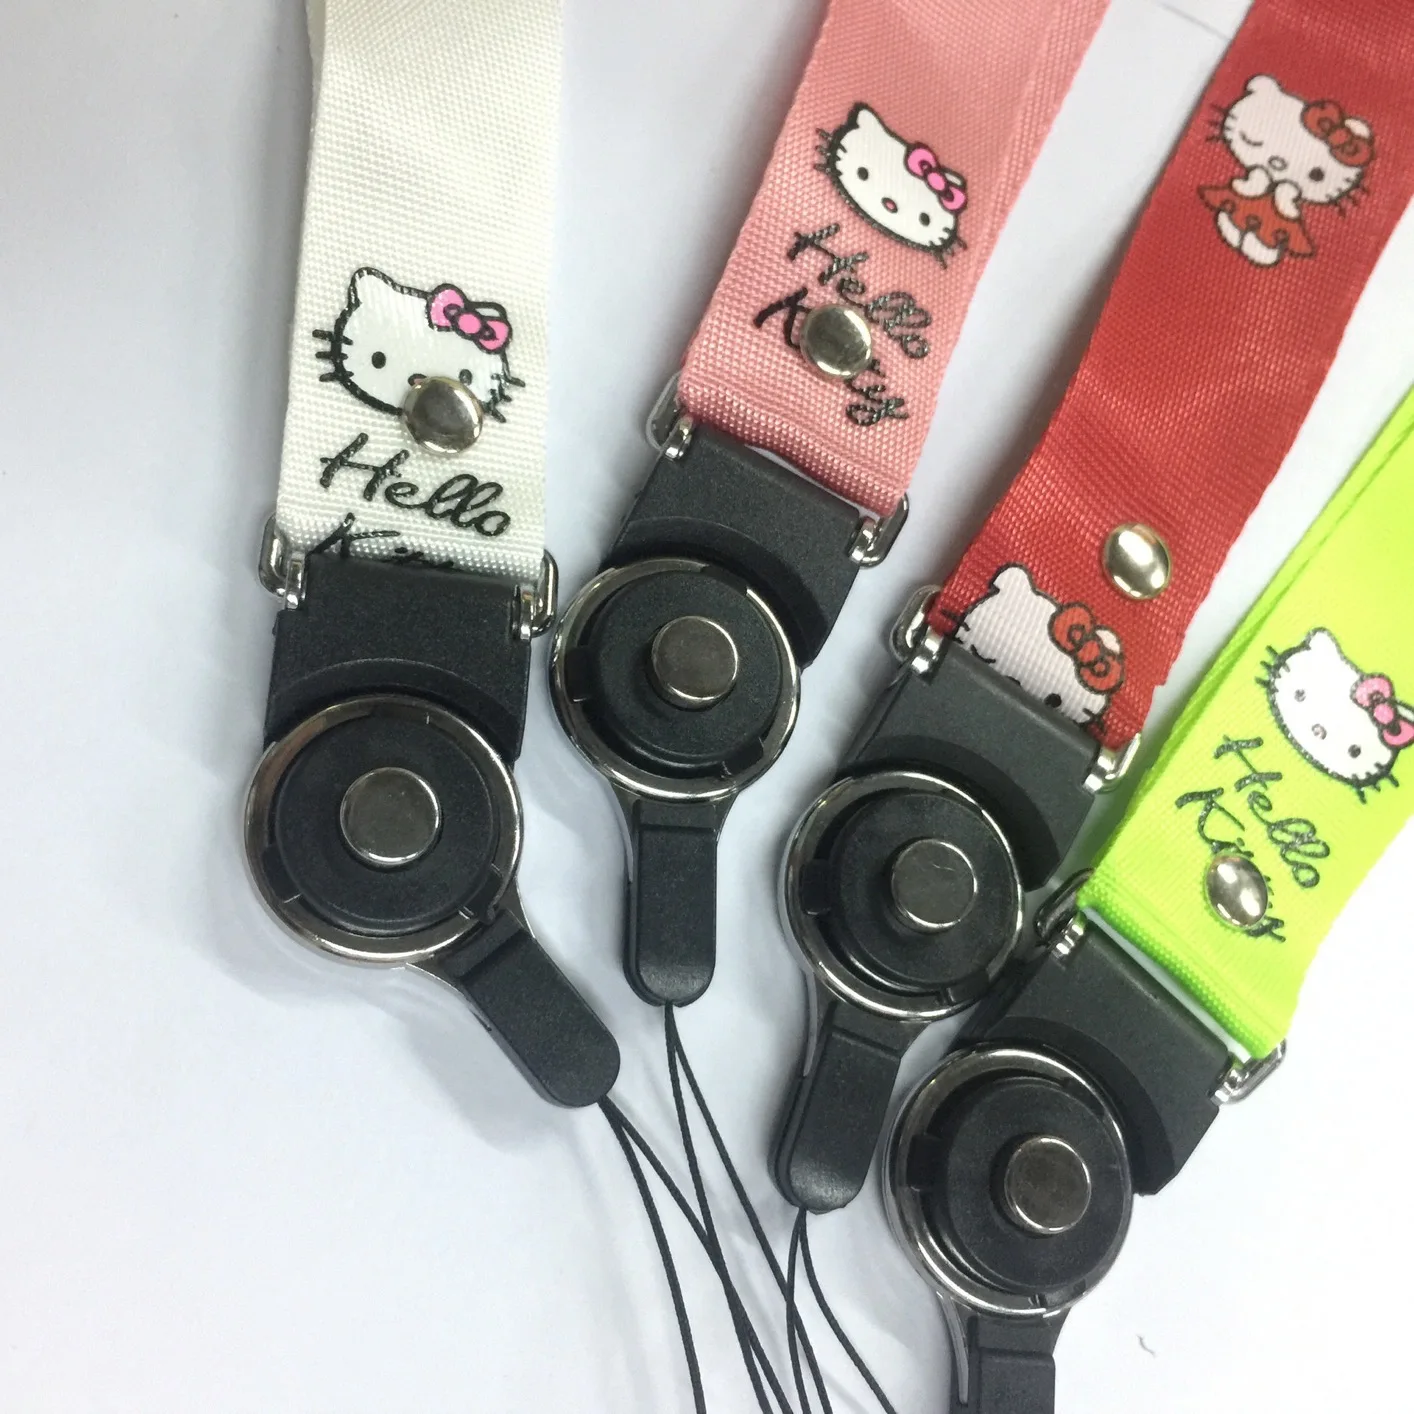 New arrival decoration mobile phone charm Chinese accessory lanyard with best service and low price